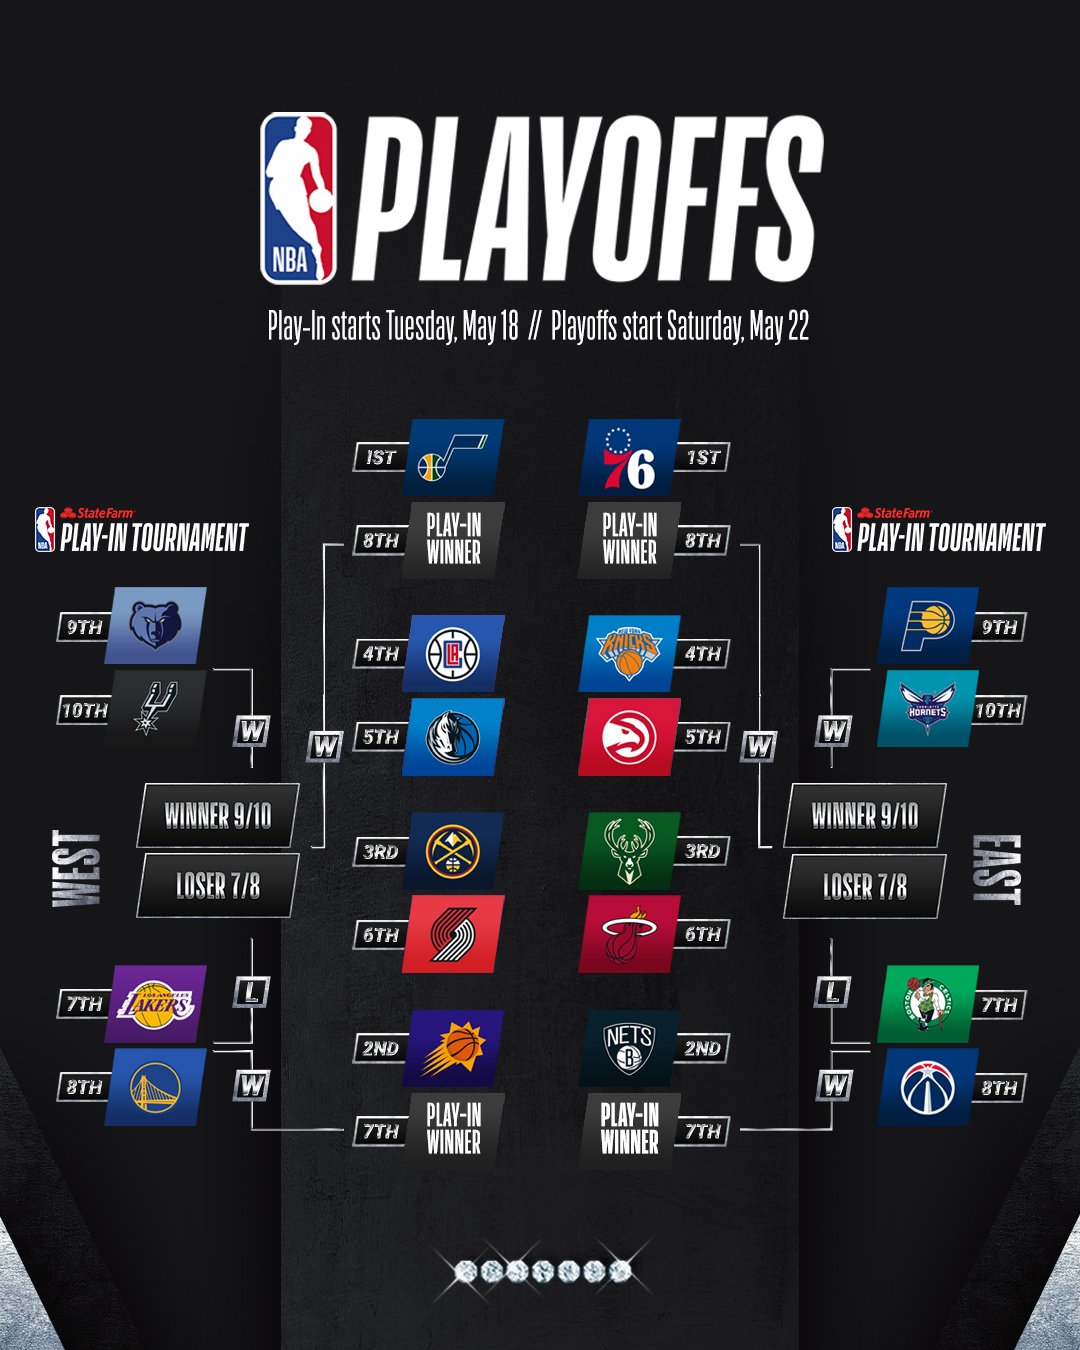 2021-nba-play-in-tournament-schedule-revealed-bleachers-news